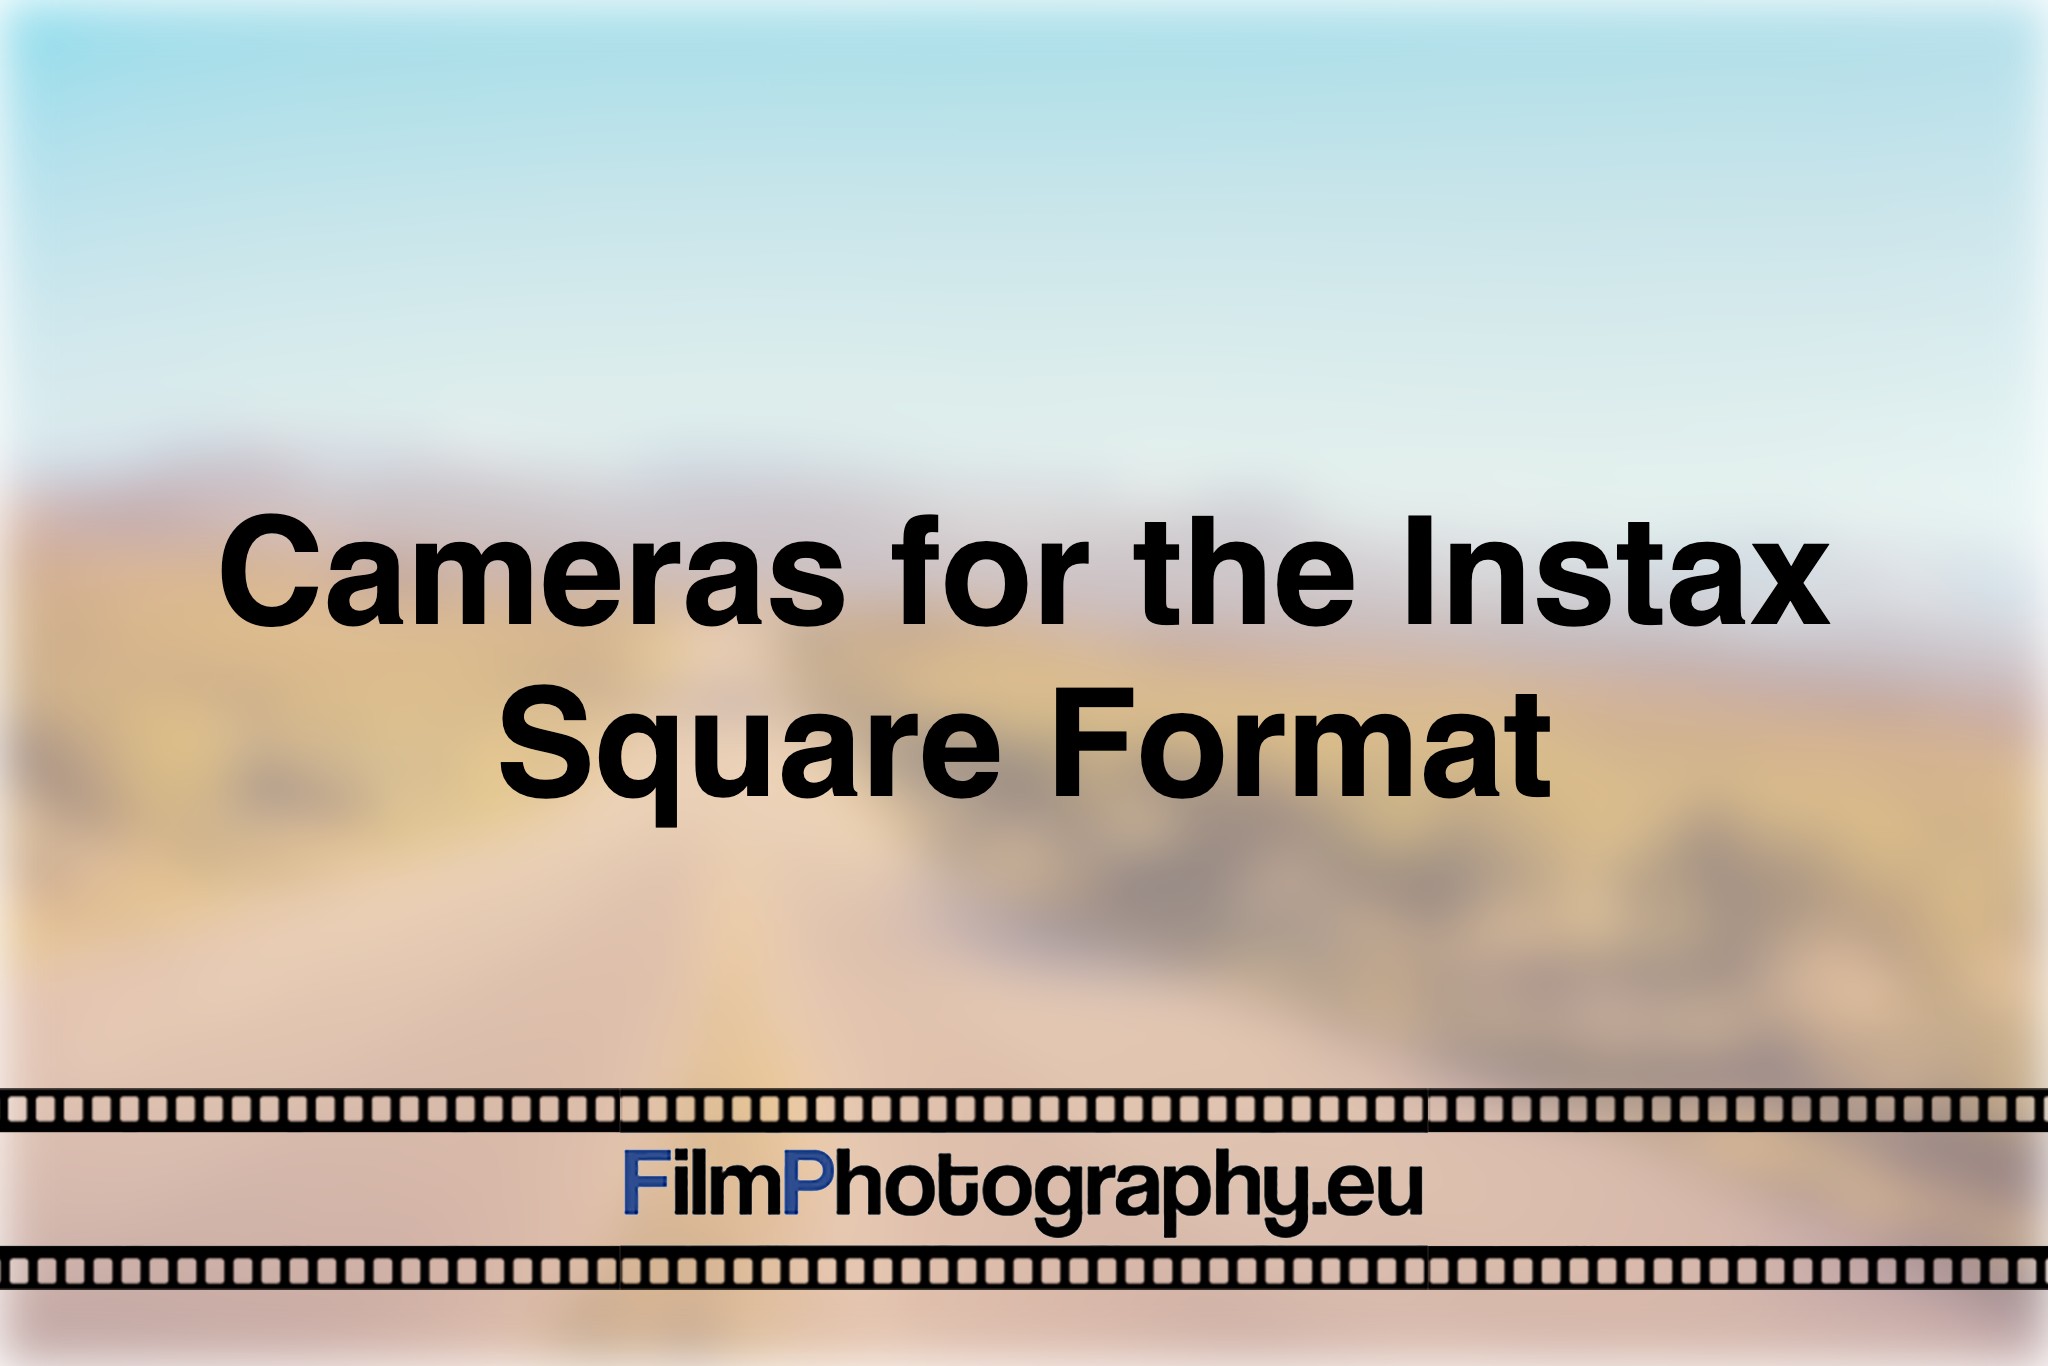 cameras-for-the-instax-square-format-photo-bnv